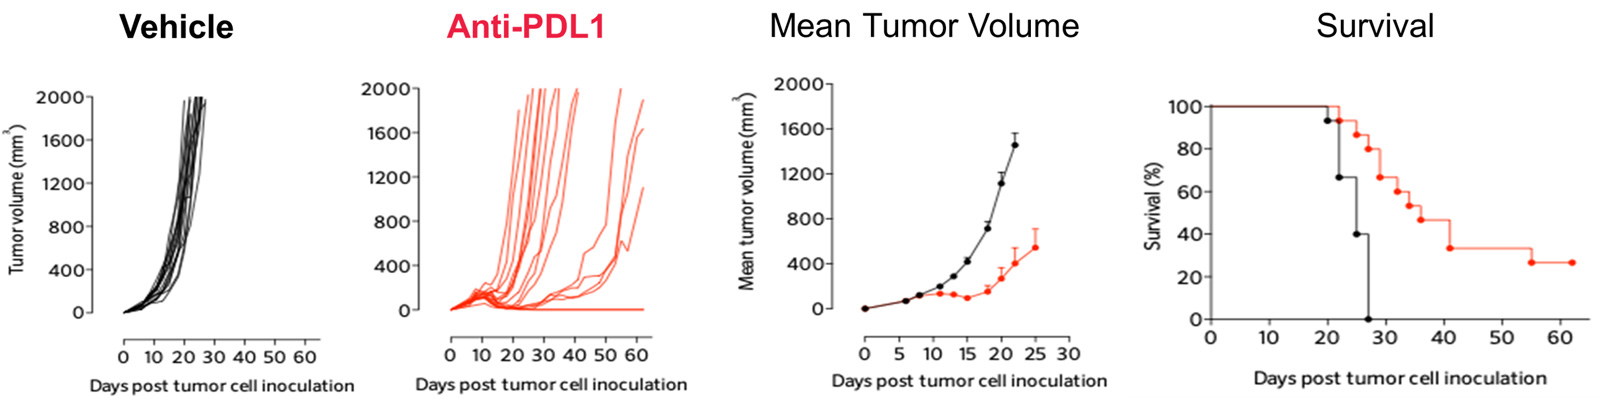 PDL1 inhibition triggers significant anti-tumor response in the MCA205 sarcoma model